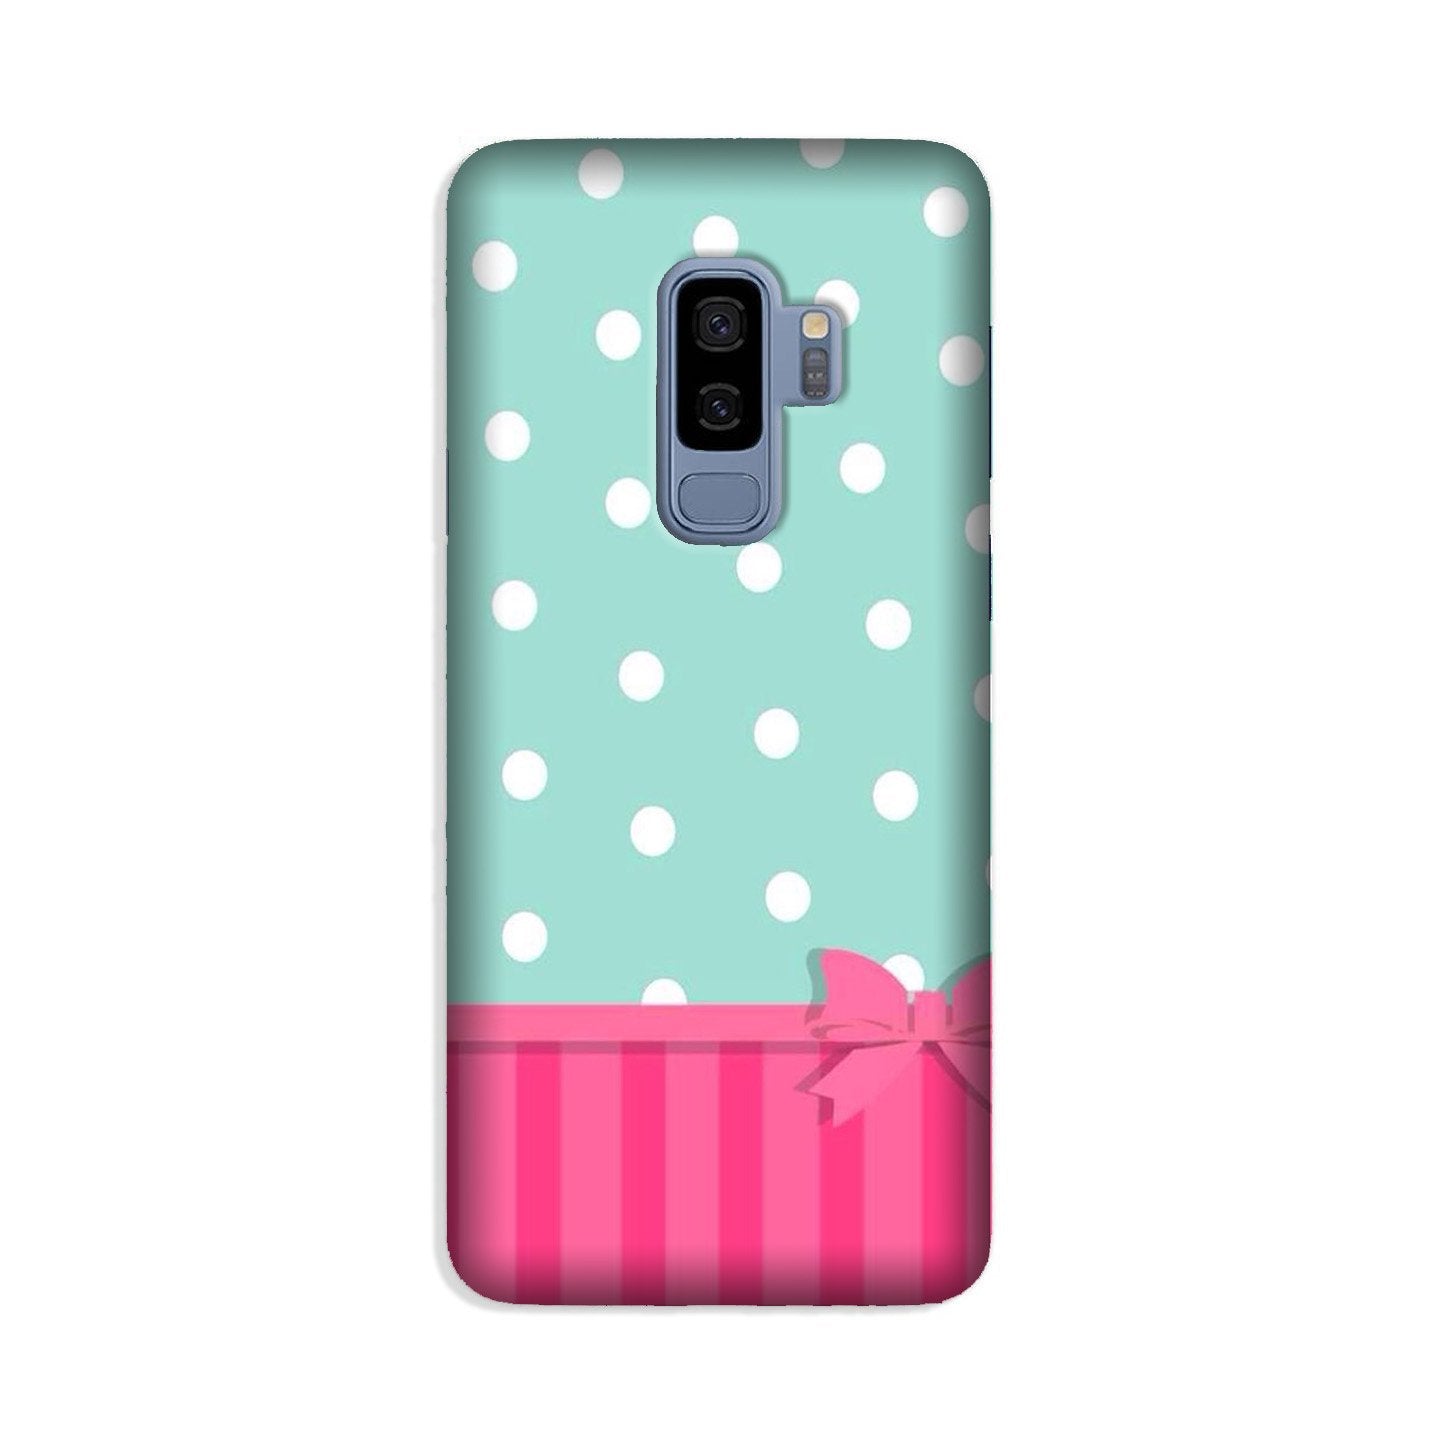 Gift Wrap Case for Galaxy S9 Plus